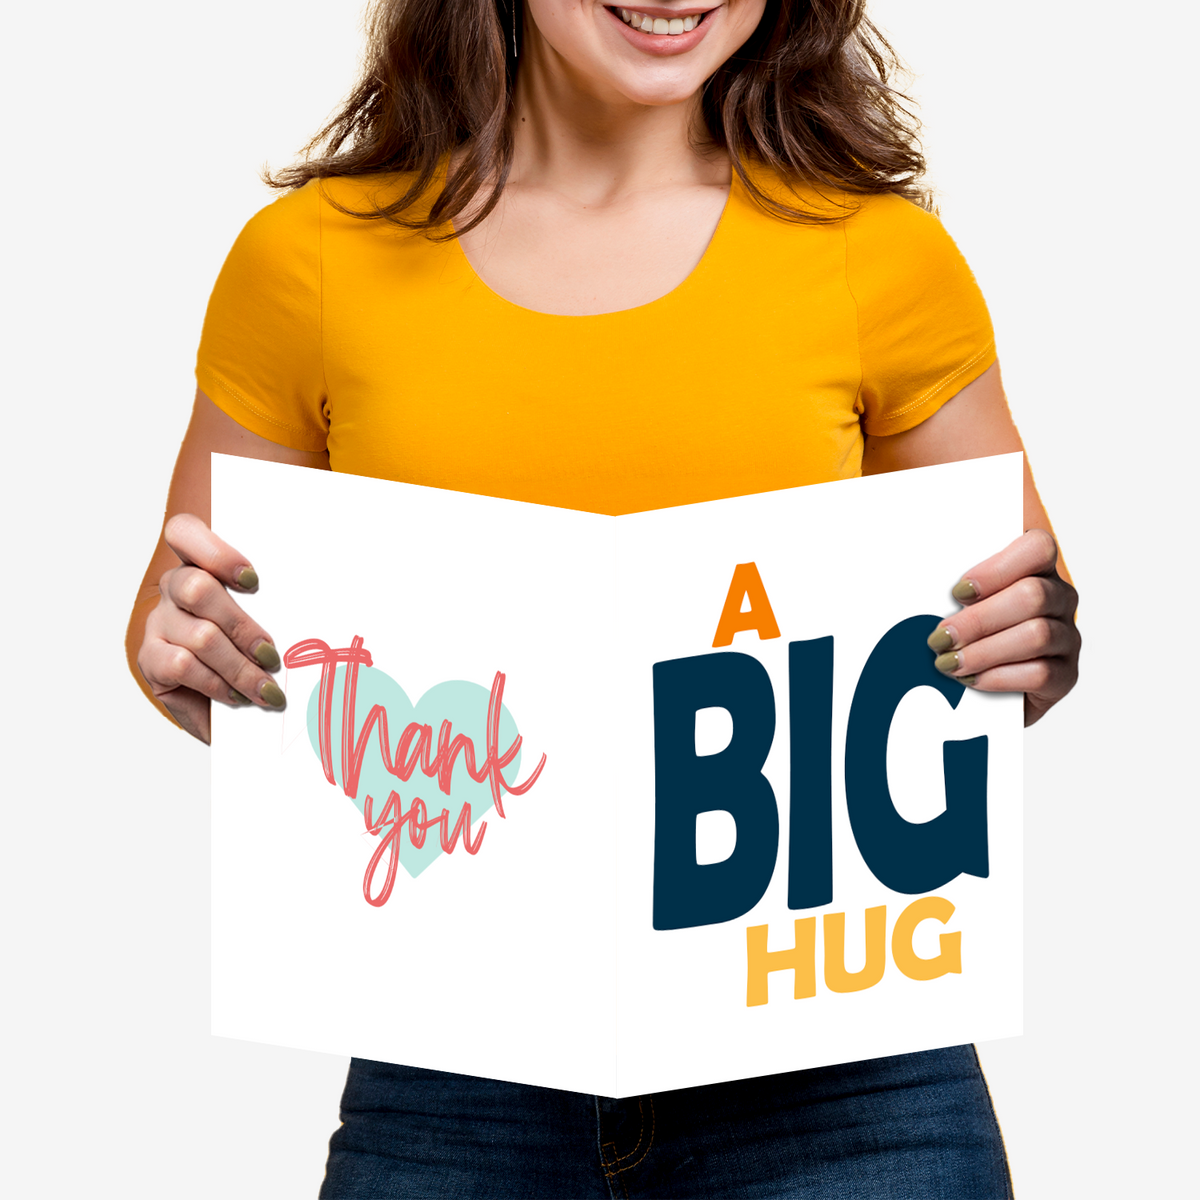 A Big Hug Thank You Greeting Cards with Envelopes – 8.5" x 11" Jumbo Size Cards for Large Groups and Teams  – 2 per Pack